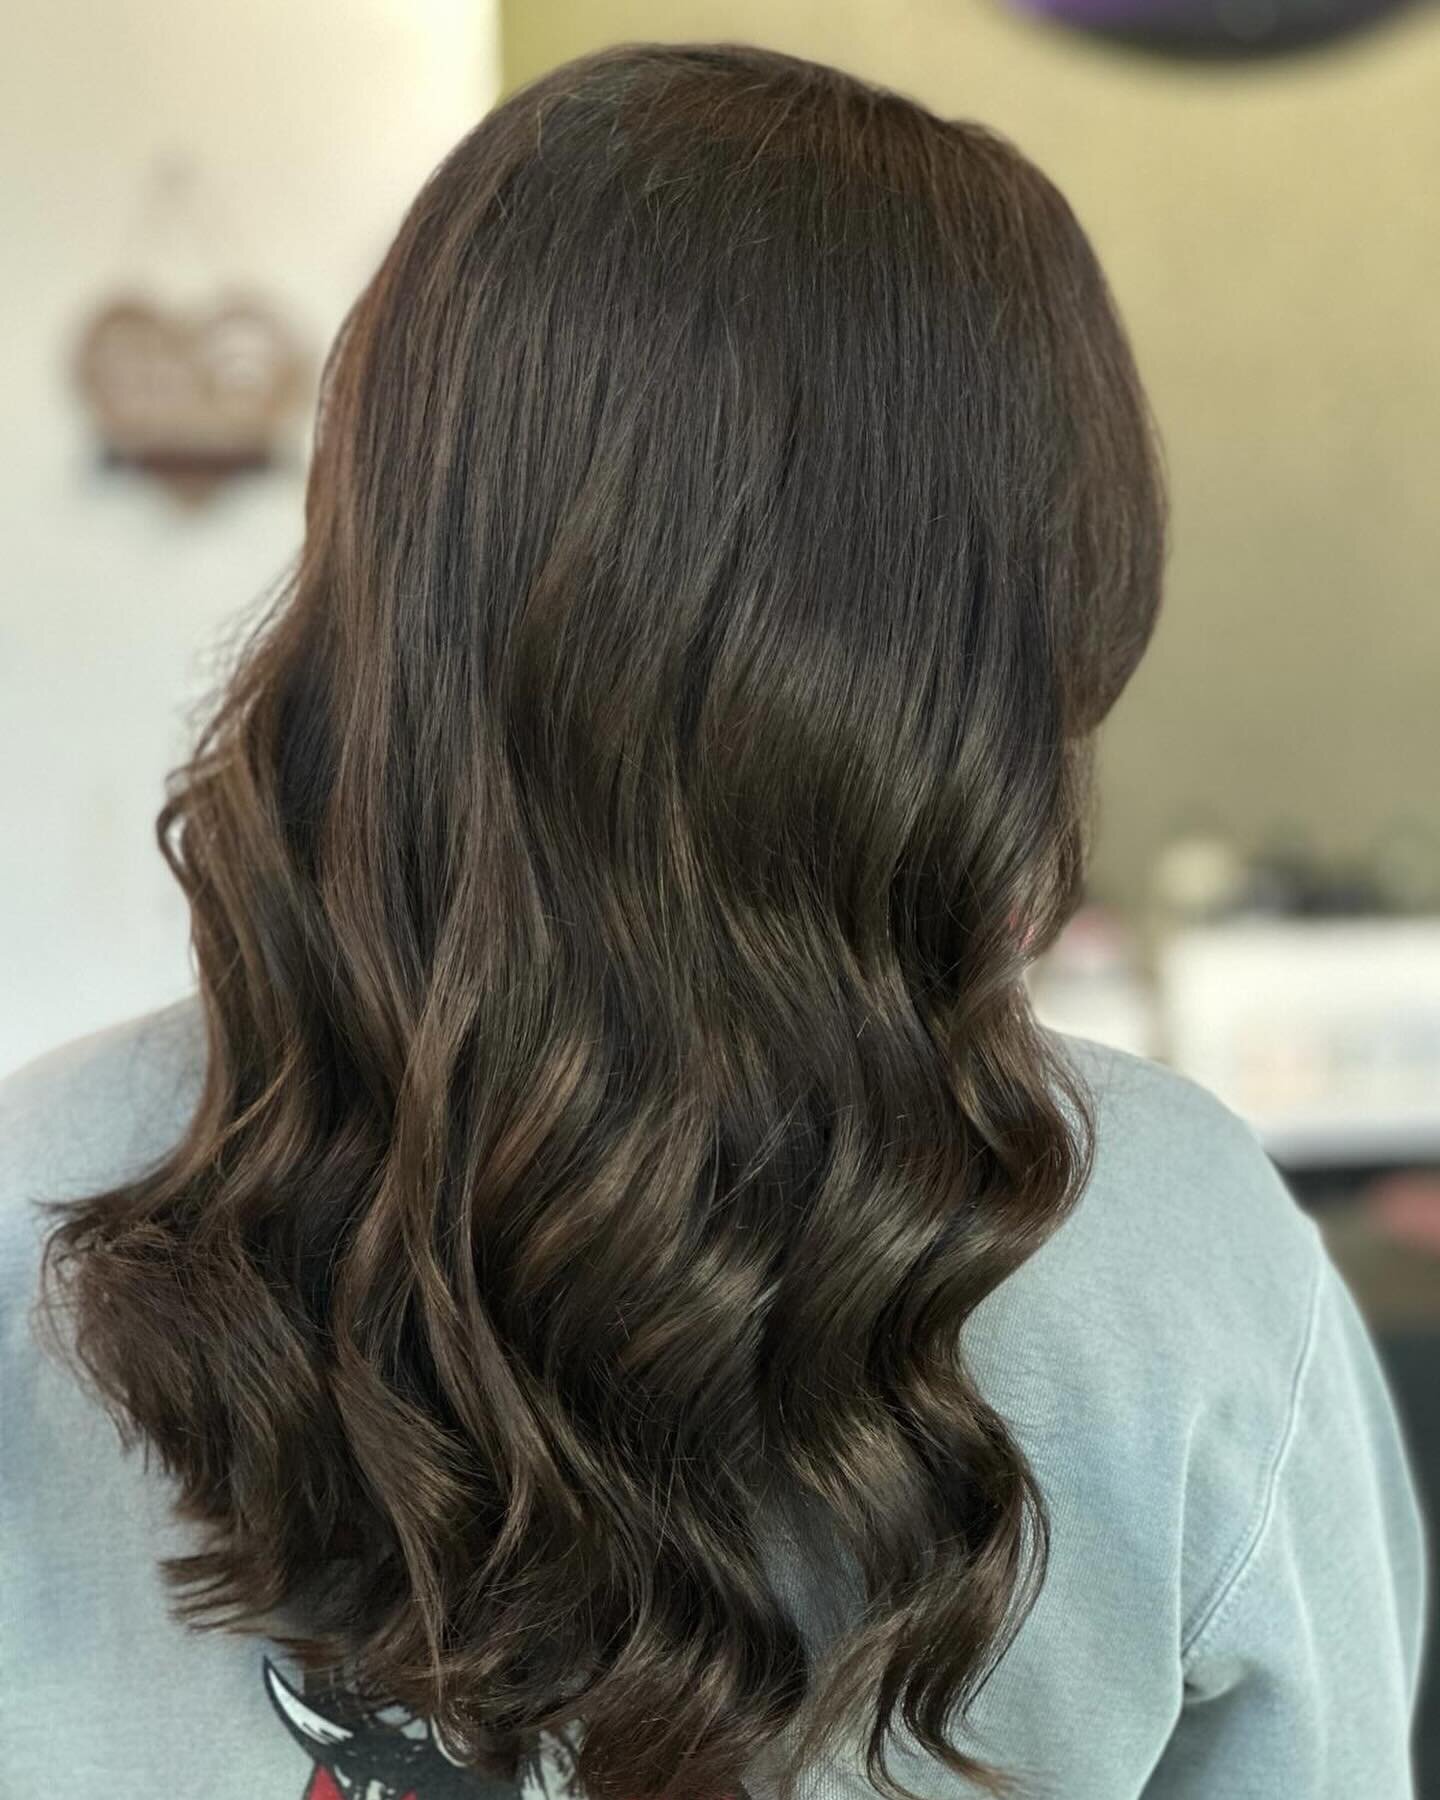 ✨✂️ Feeling like an old money brunette today 🍸💁🏻&zwj;♀️ Who else is ready to channel their inner elegance and sophistication? Book now with Jami! 
#OldMoneyBrunette #HairGoals #TimelessBeauty #BrunetteBabes #HairStylistLife